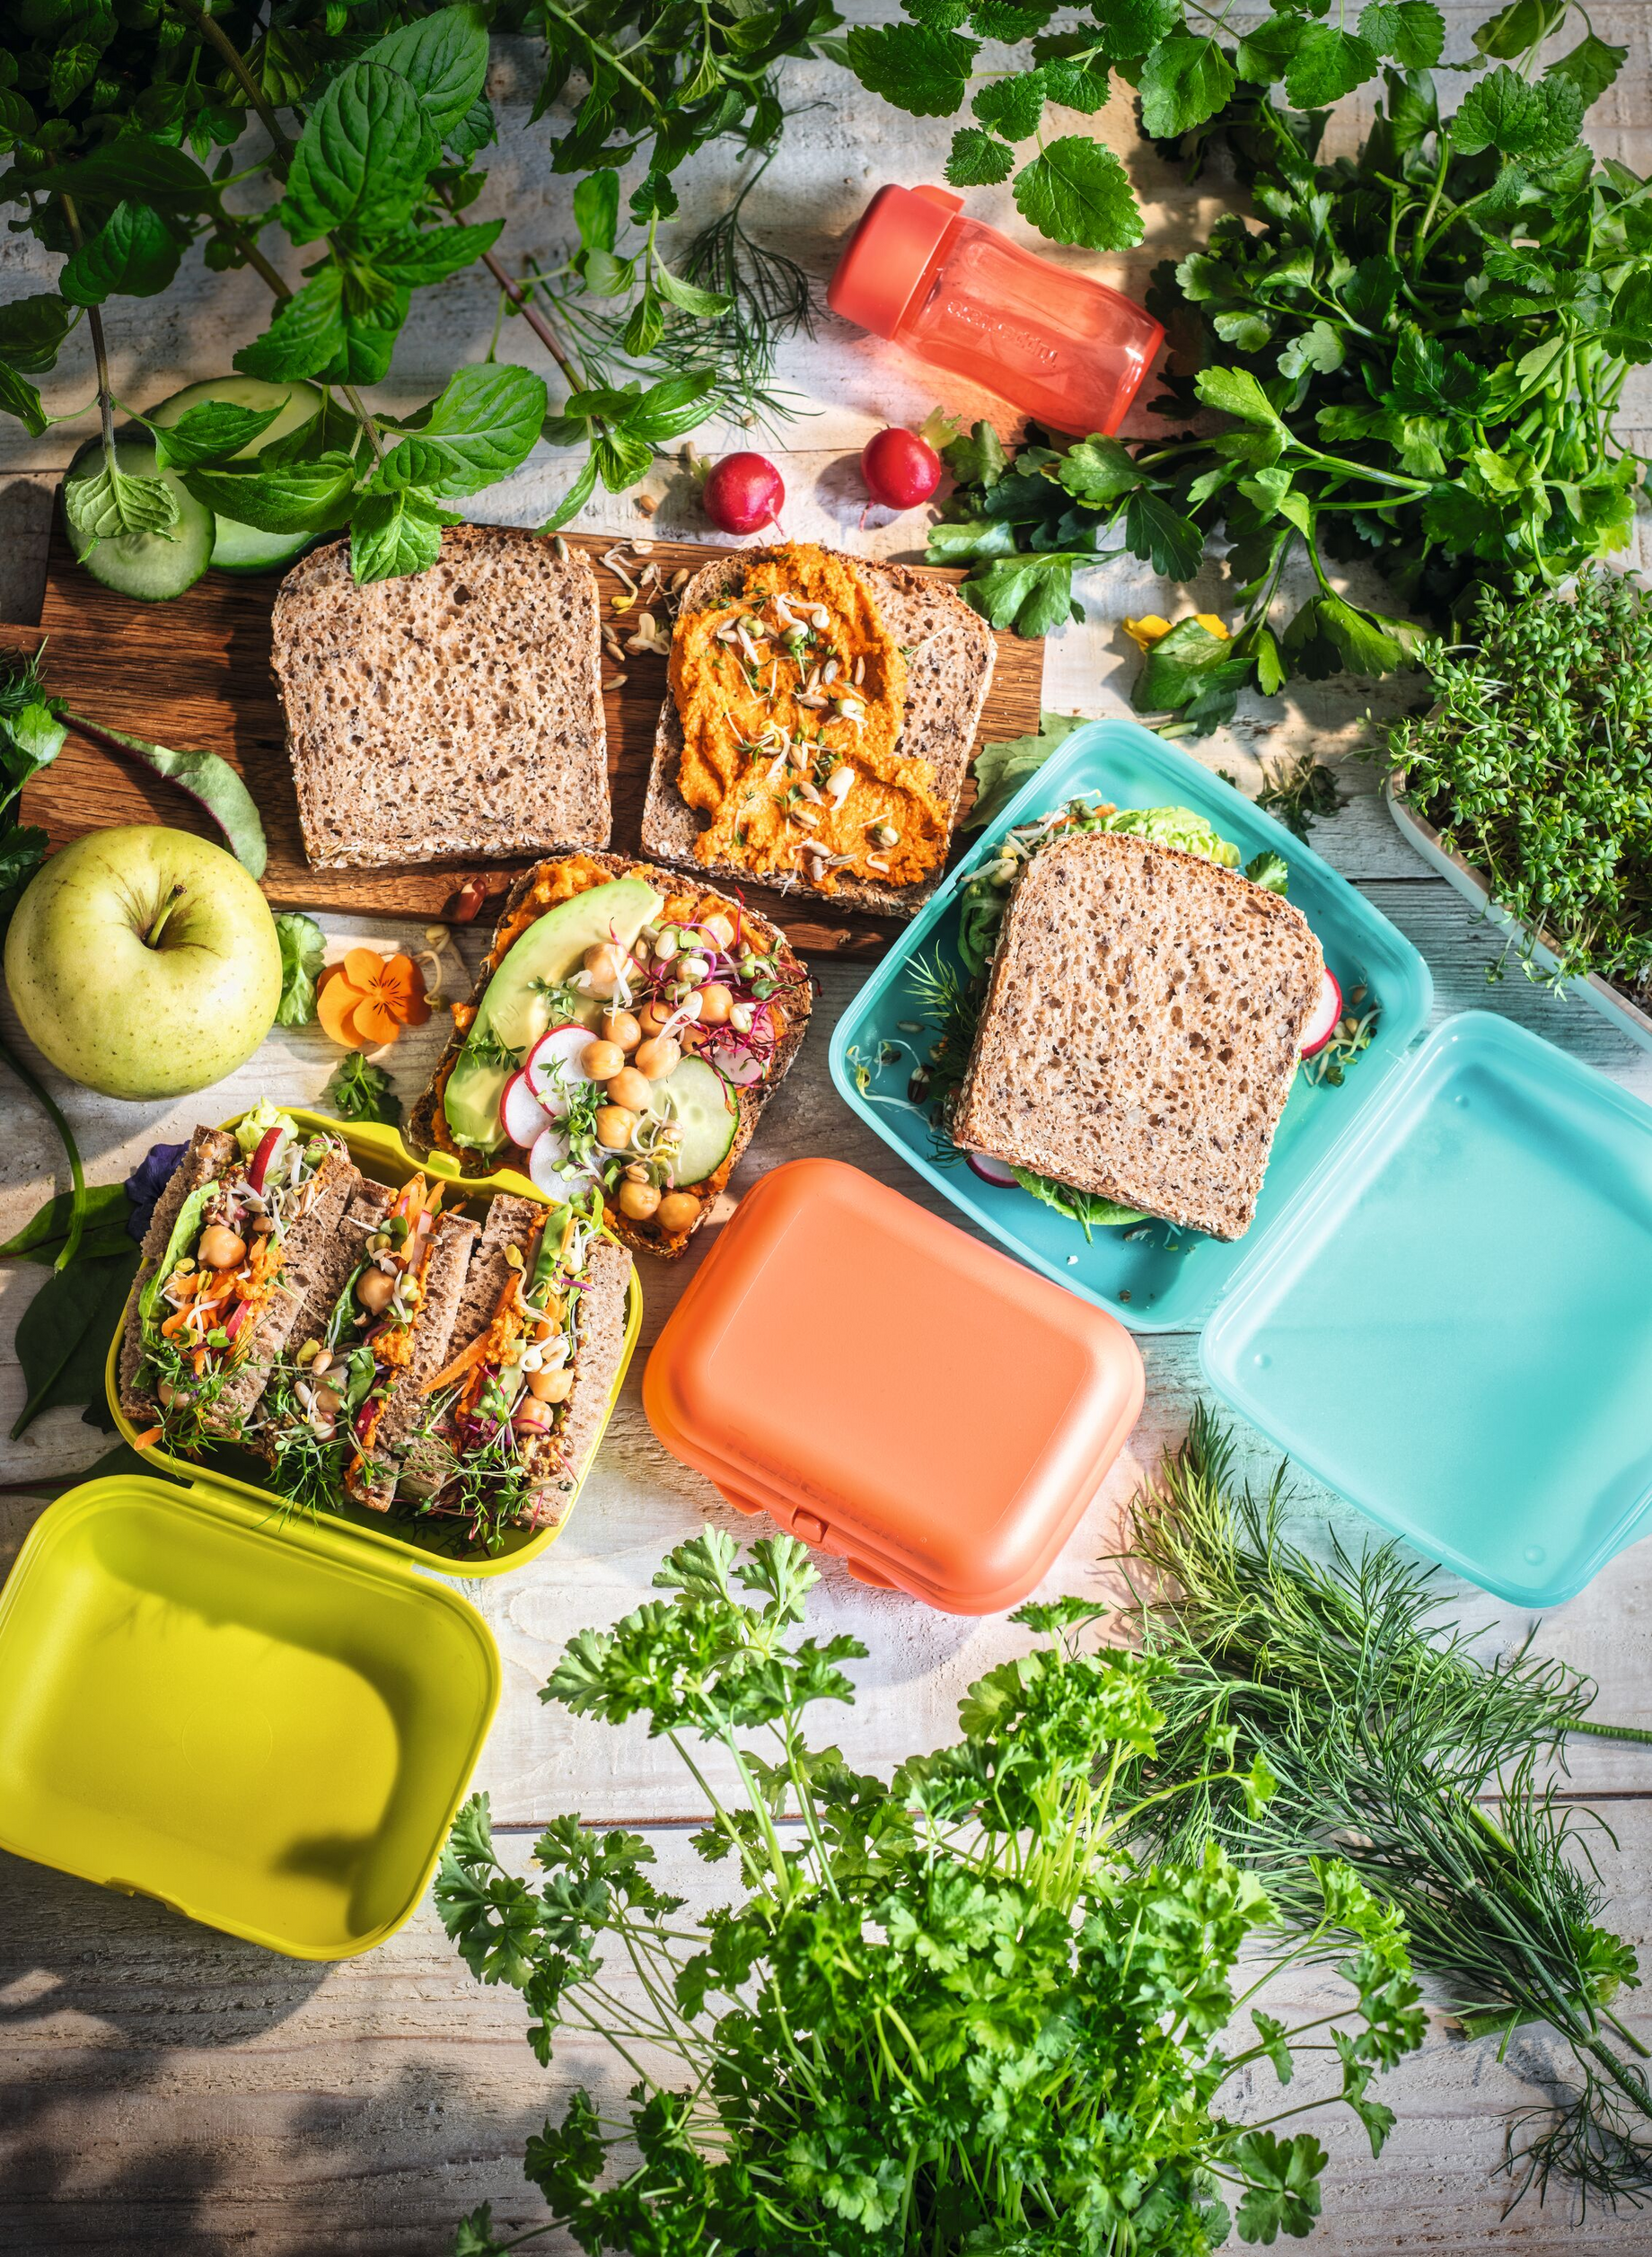 https://appng.tupperware.eu/service/appng/tupperware-products/rest/autoCrop/371428/1840/x